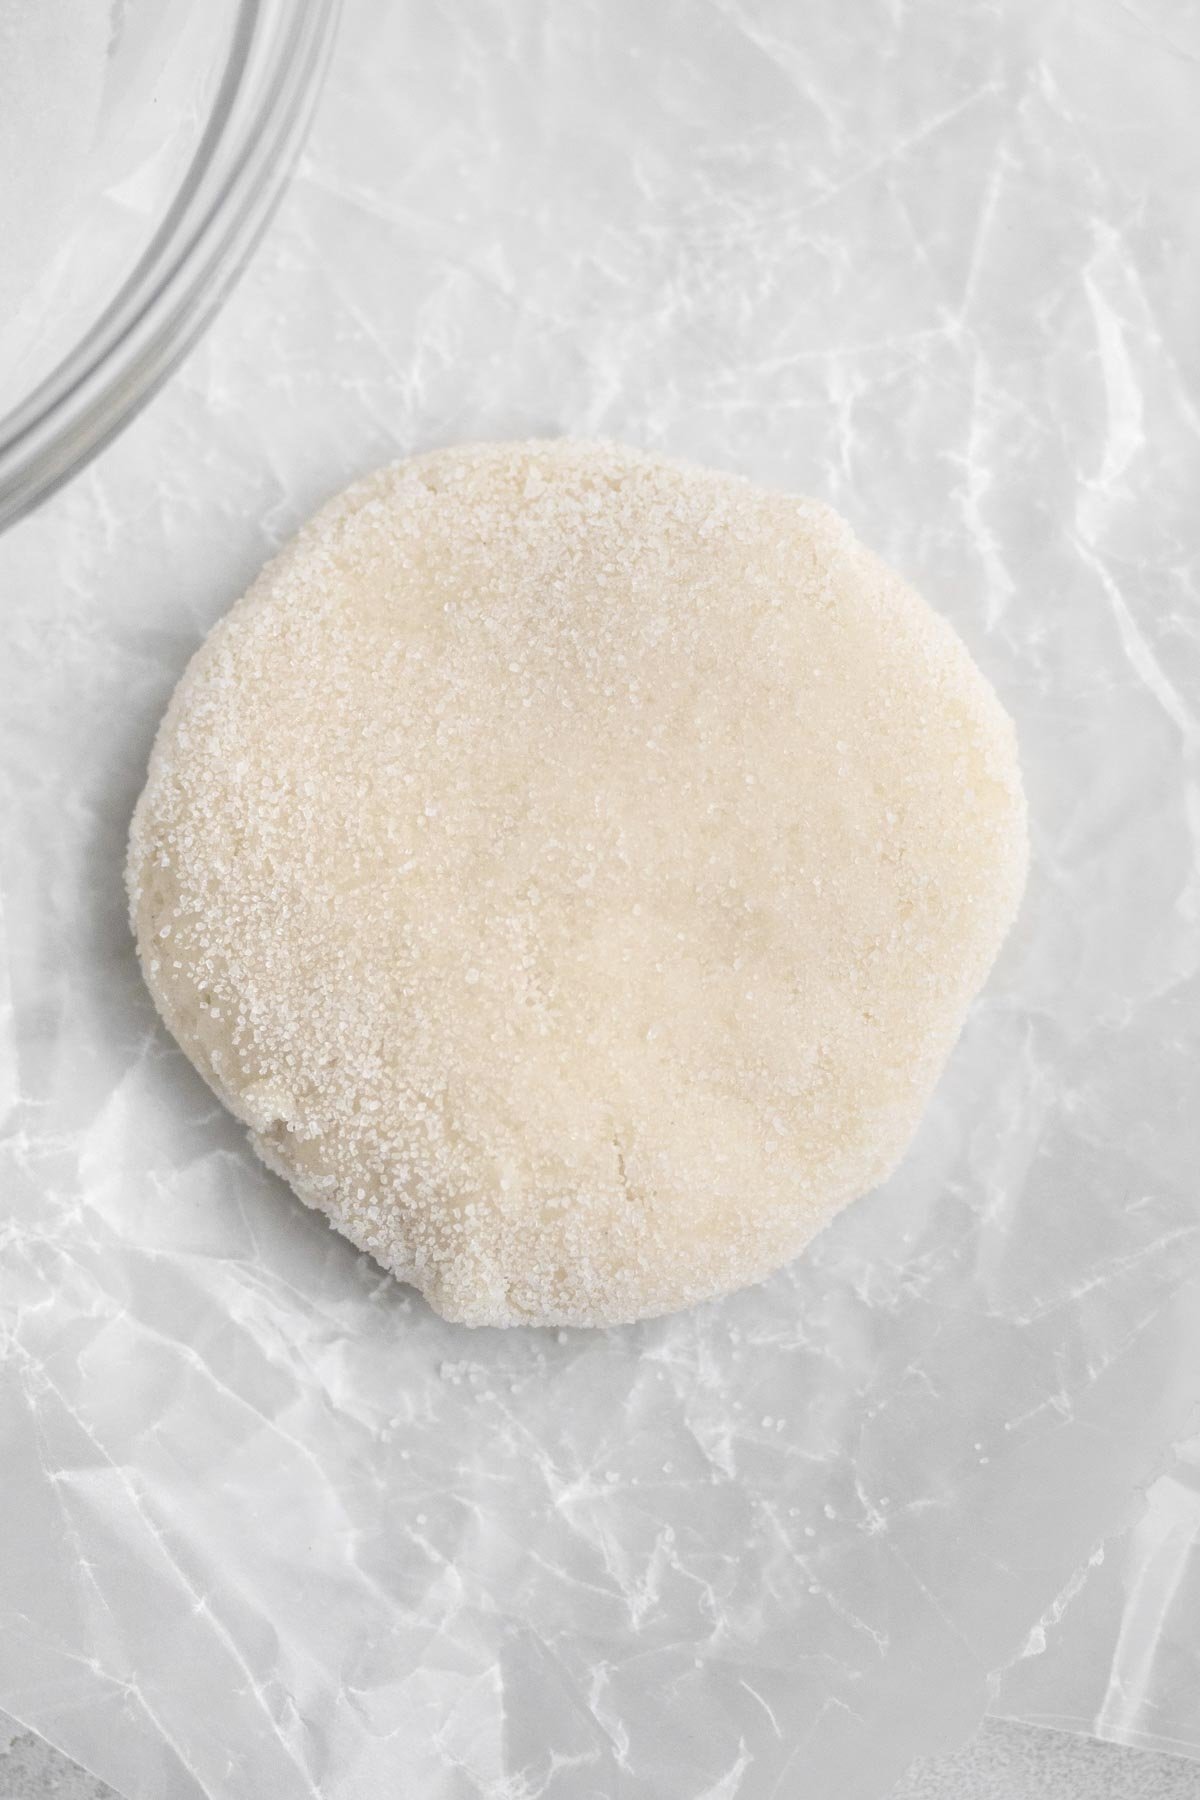 Granulated sugar is pressed into the dough disc.